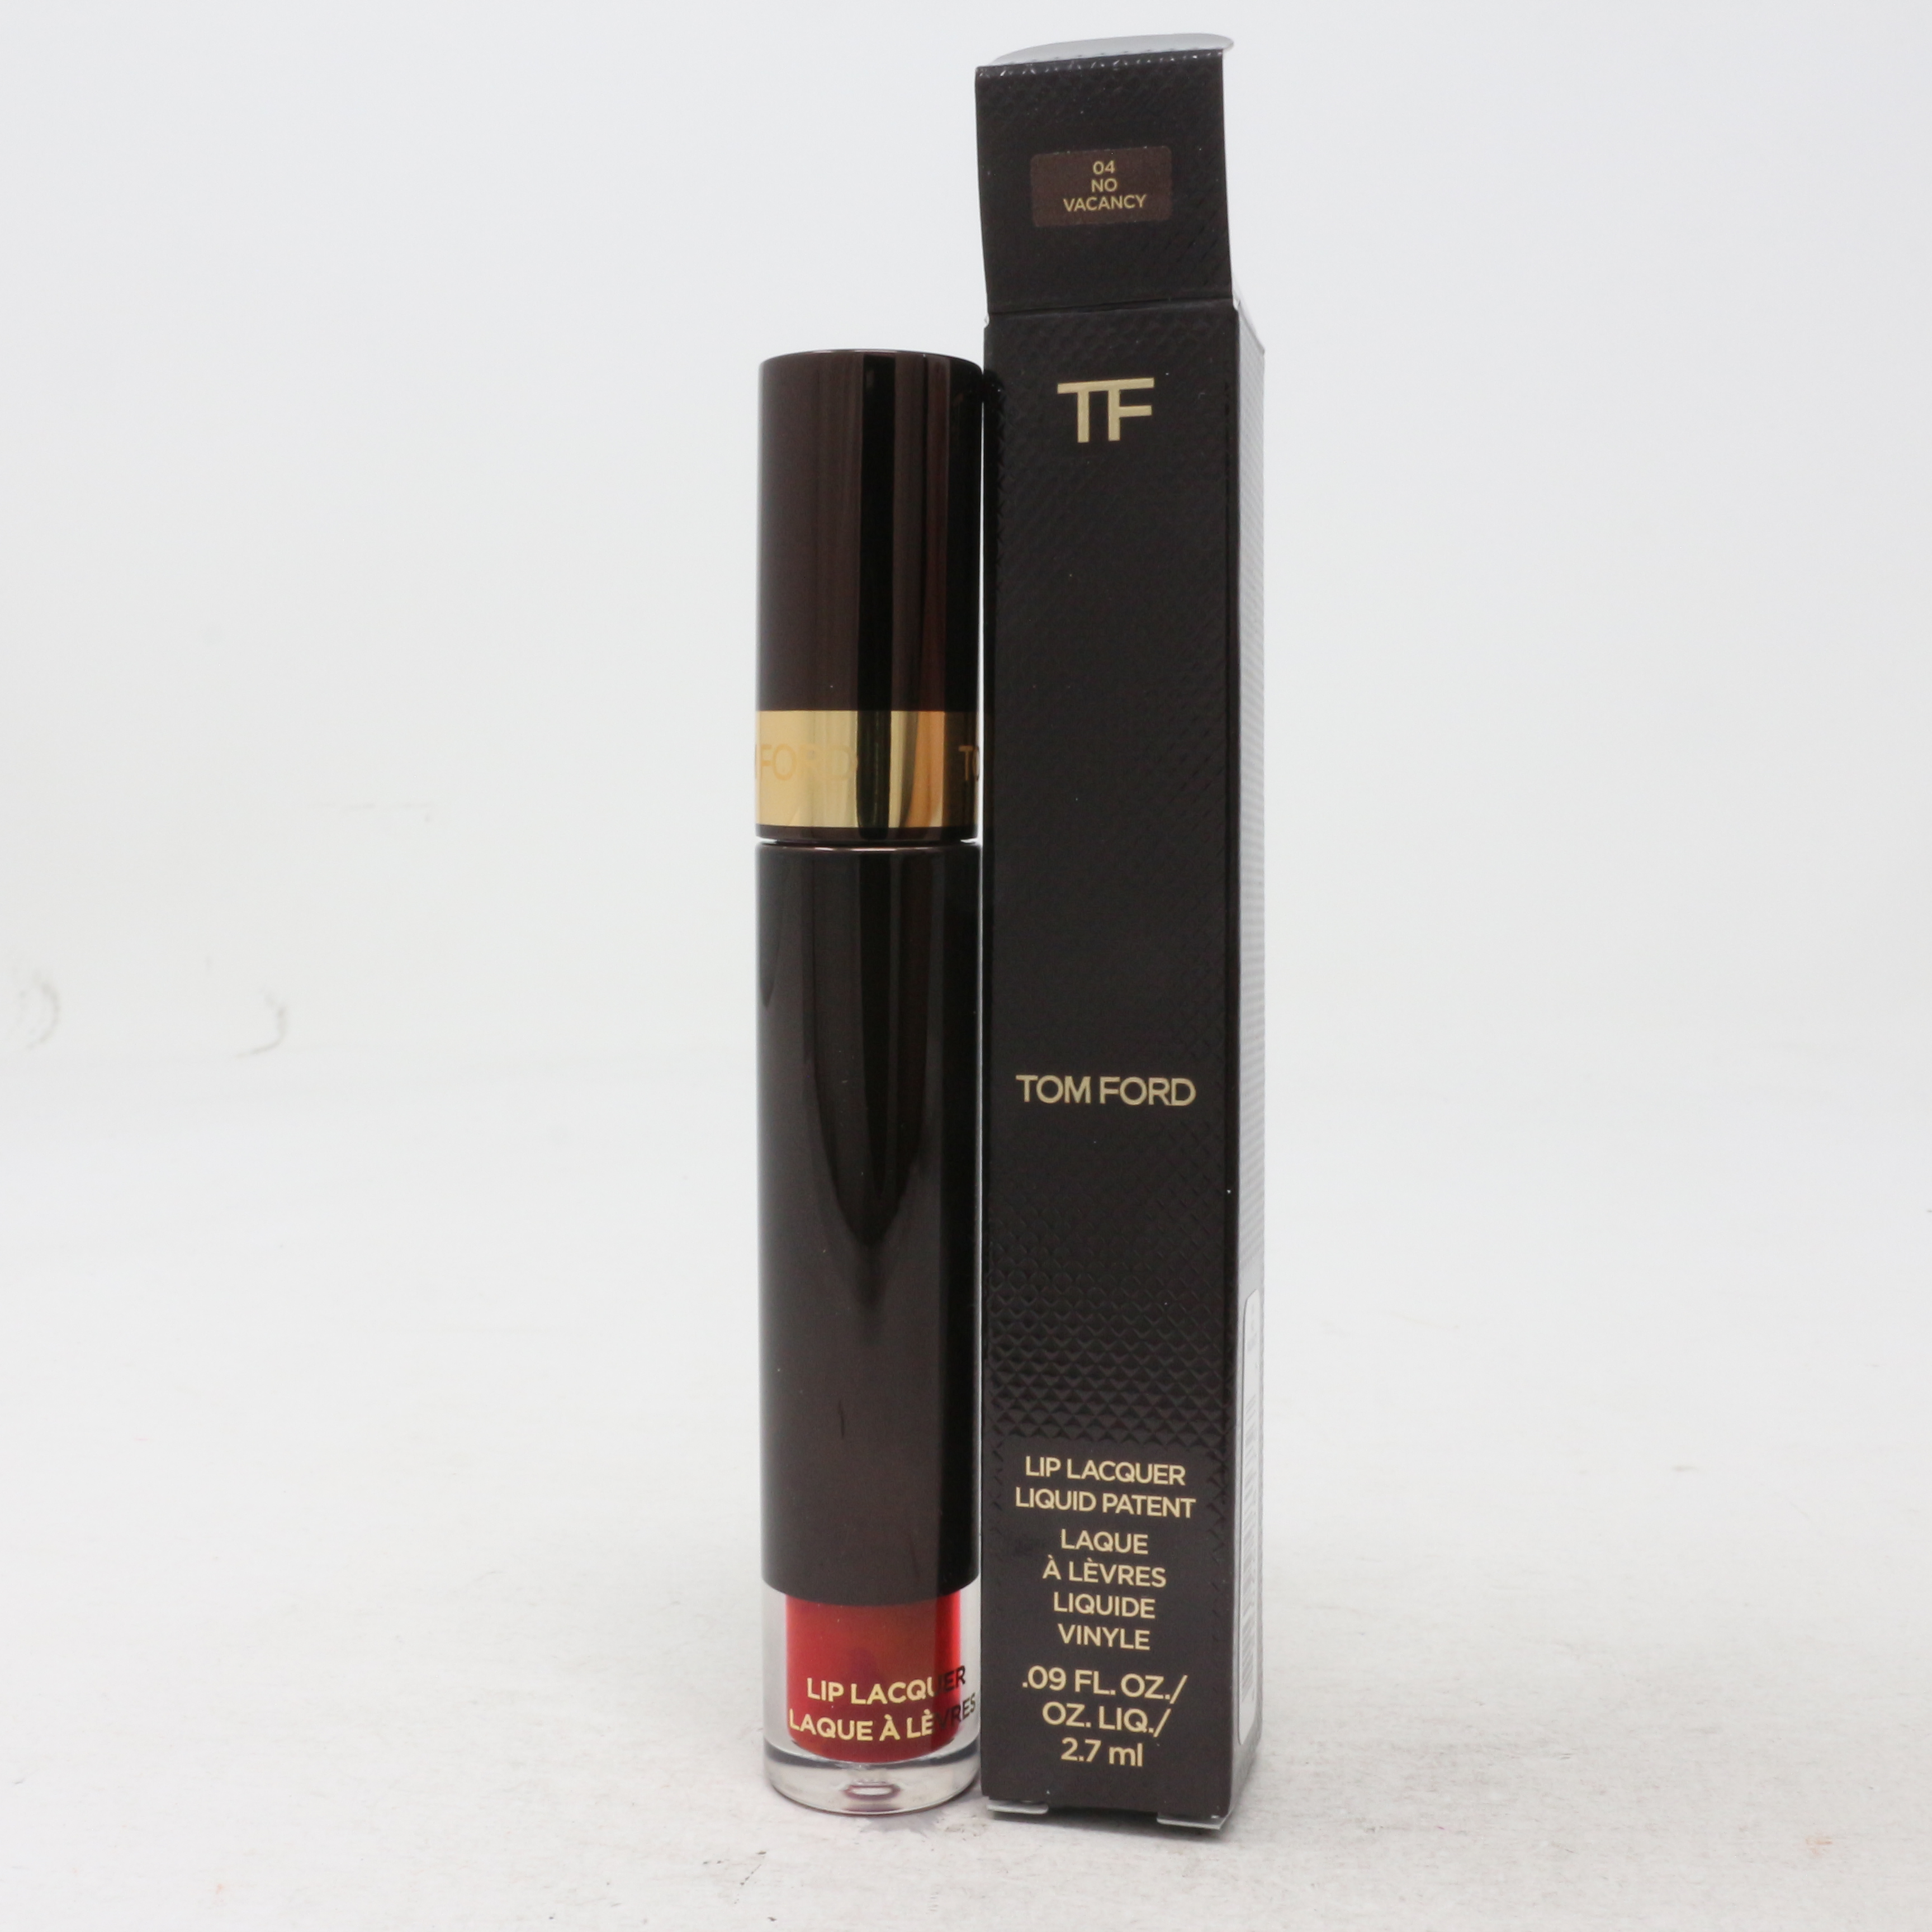 Tom Ford Lip Lacquer Liquid Metal / New With Box | eBay